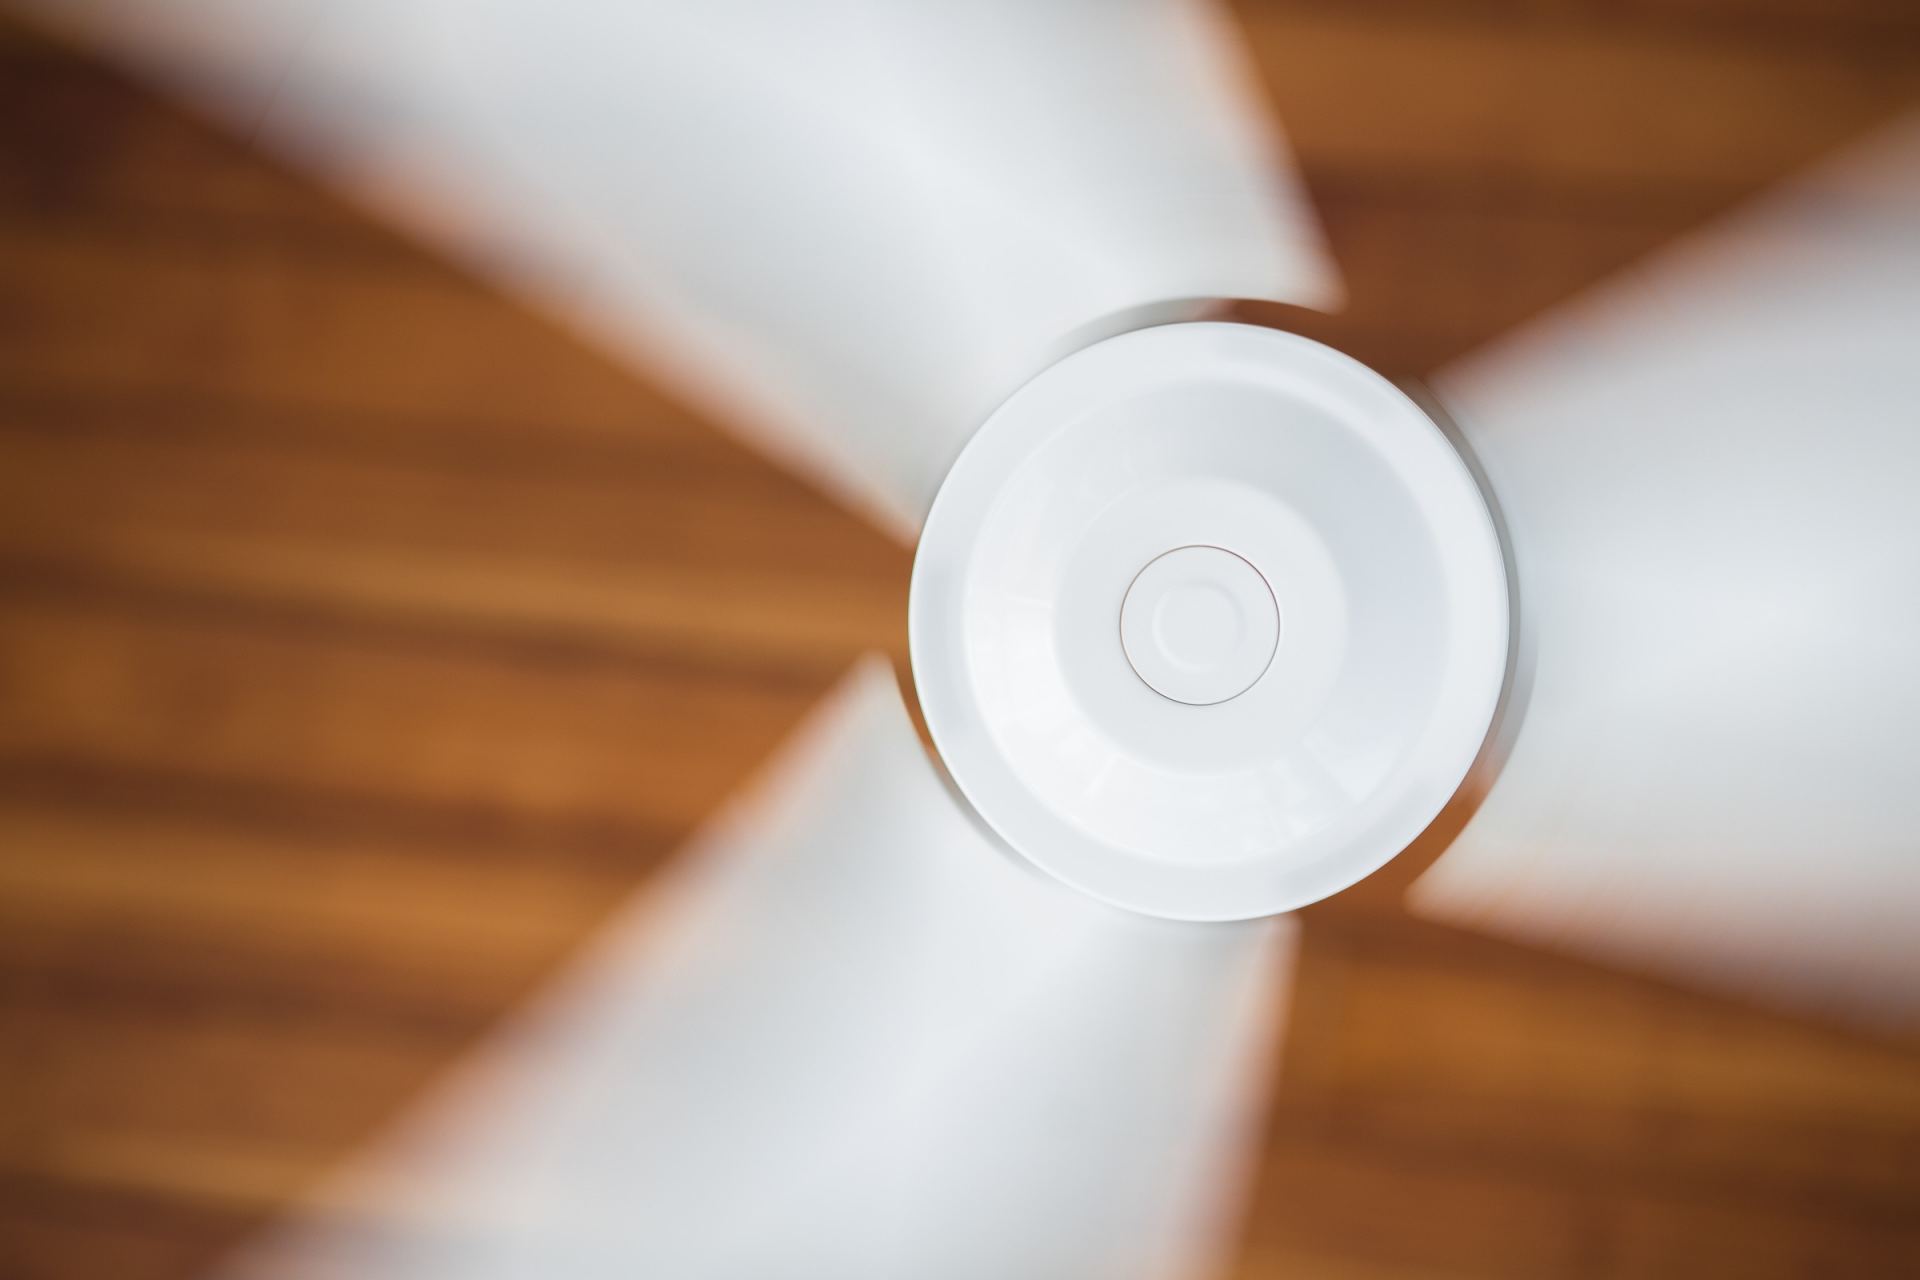 Taobao Ceiling Fan Review: It’s Noisy and Sucks, But Looks Pretty